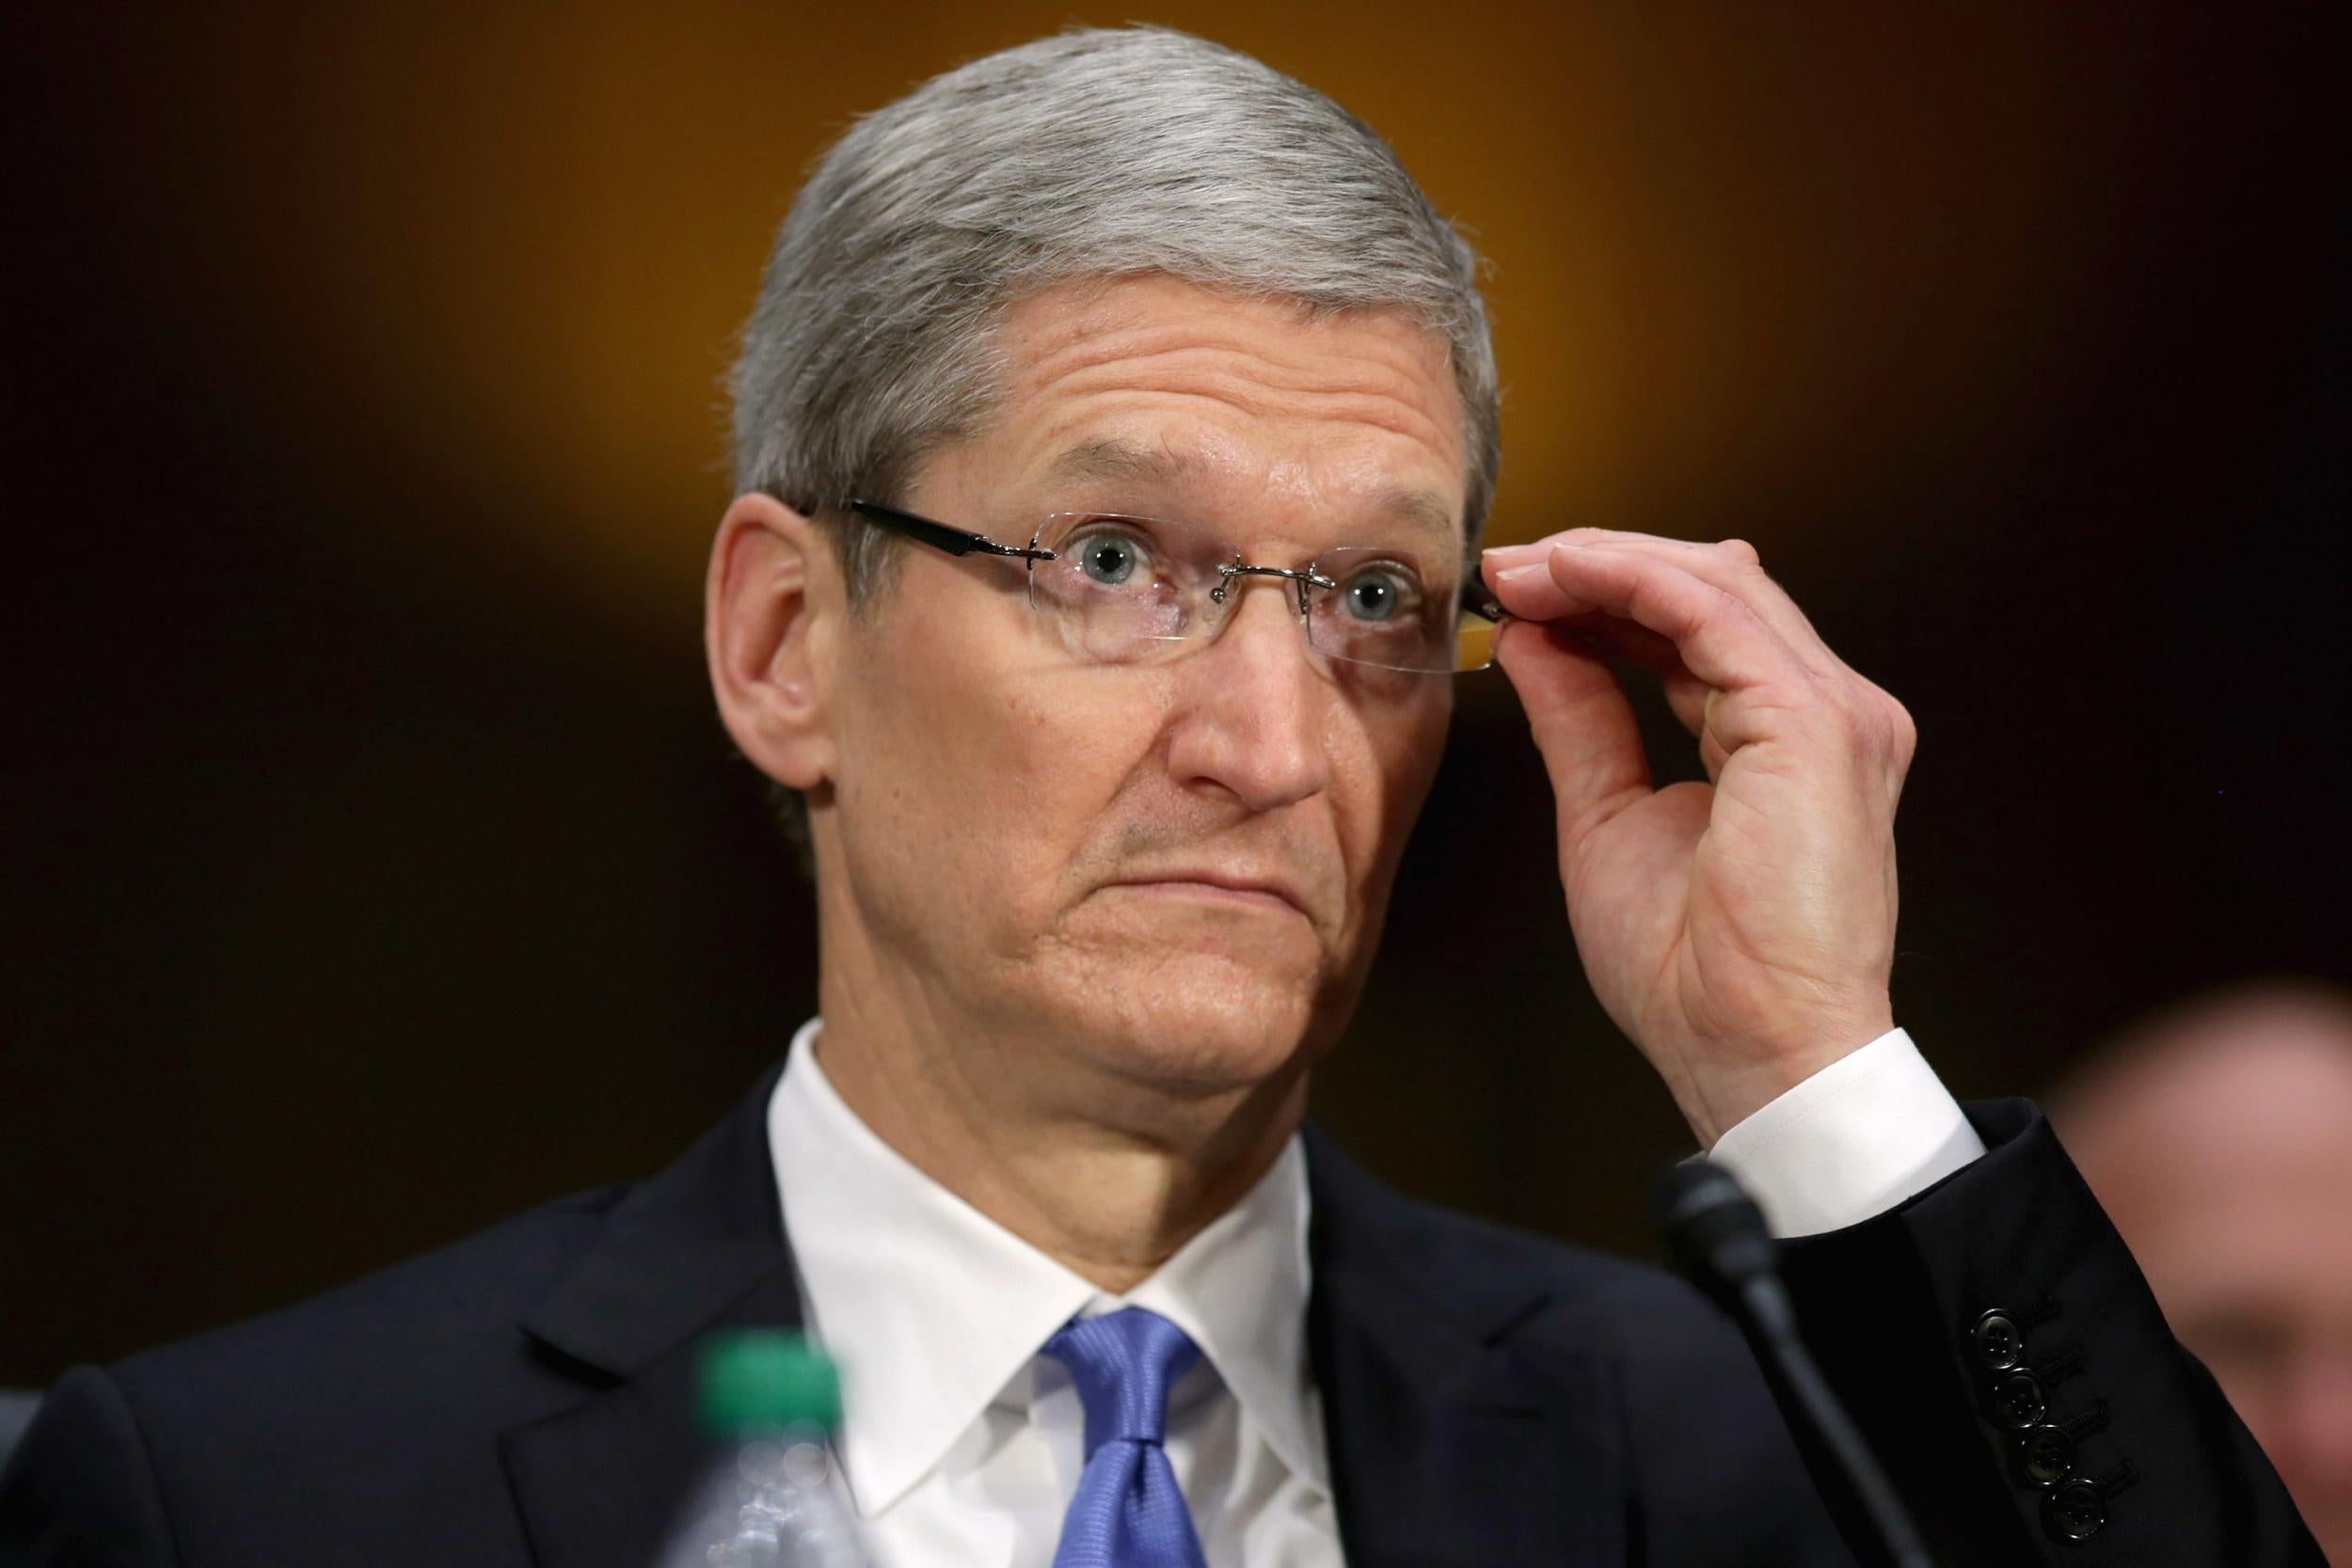 Apple CEO Tim Cook testifies before the Senate Homeland Security and Governmental Affairs Committee's Investigations Subcommittee about his company's offshore profit shifting